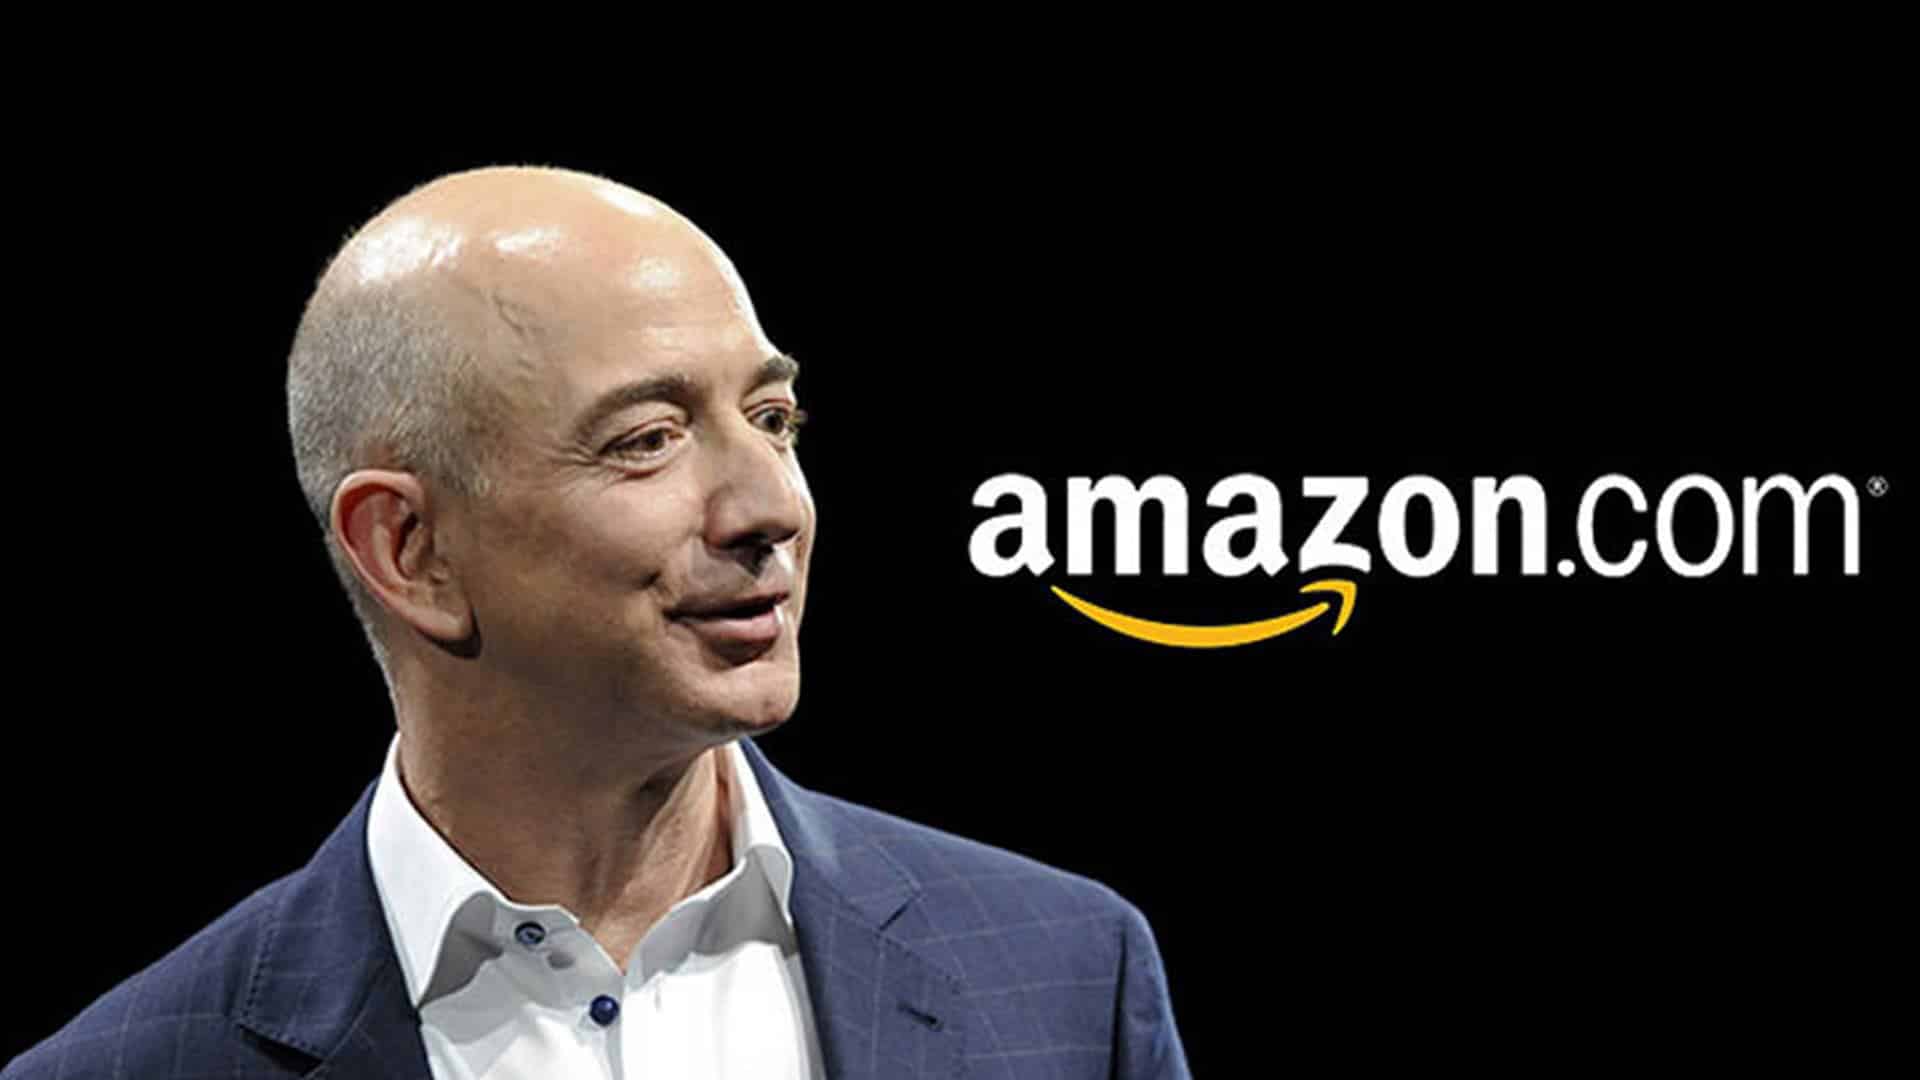 Here's what Jeff Bezos is planning after stepping away as Amazon CEO